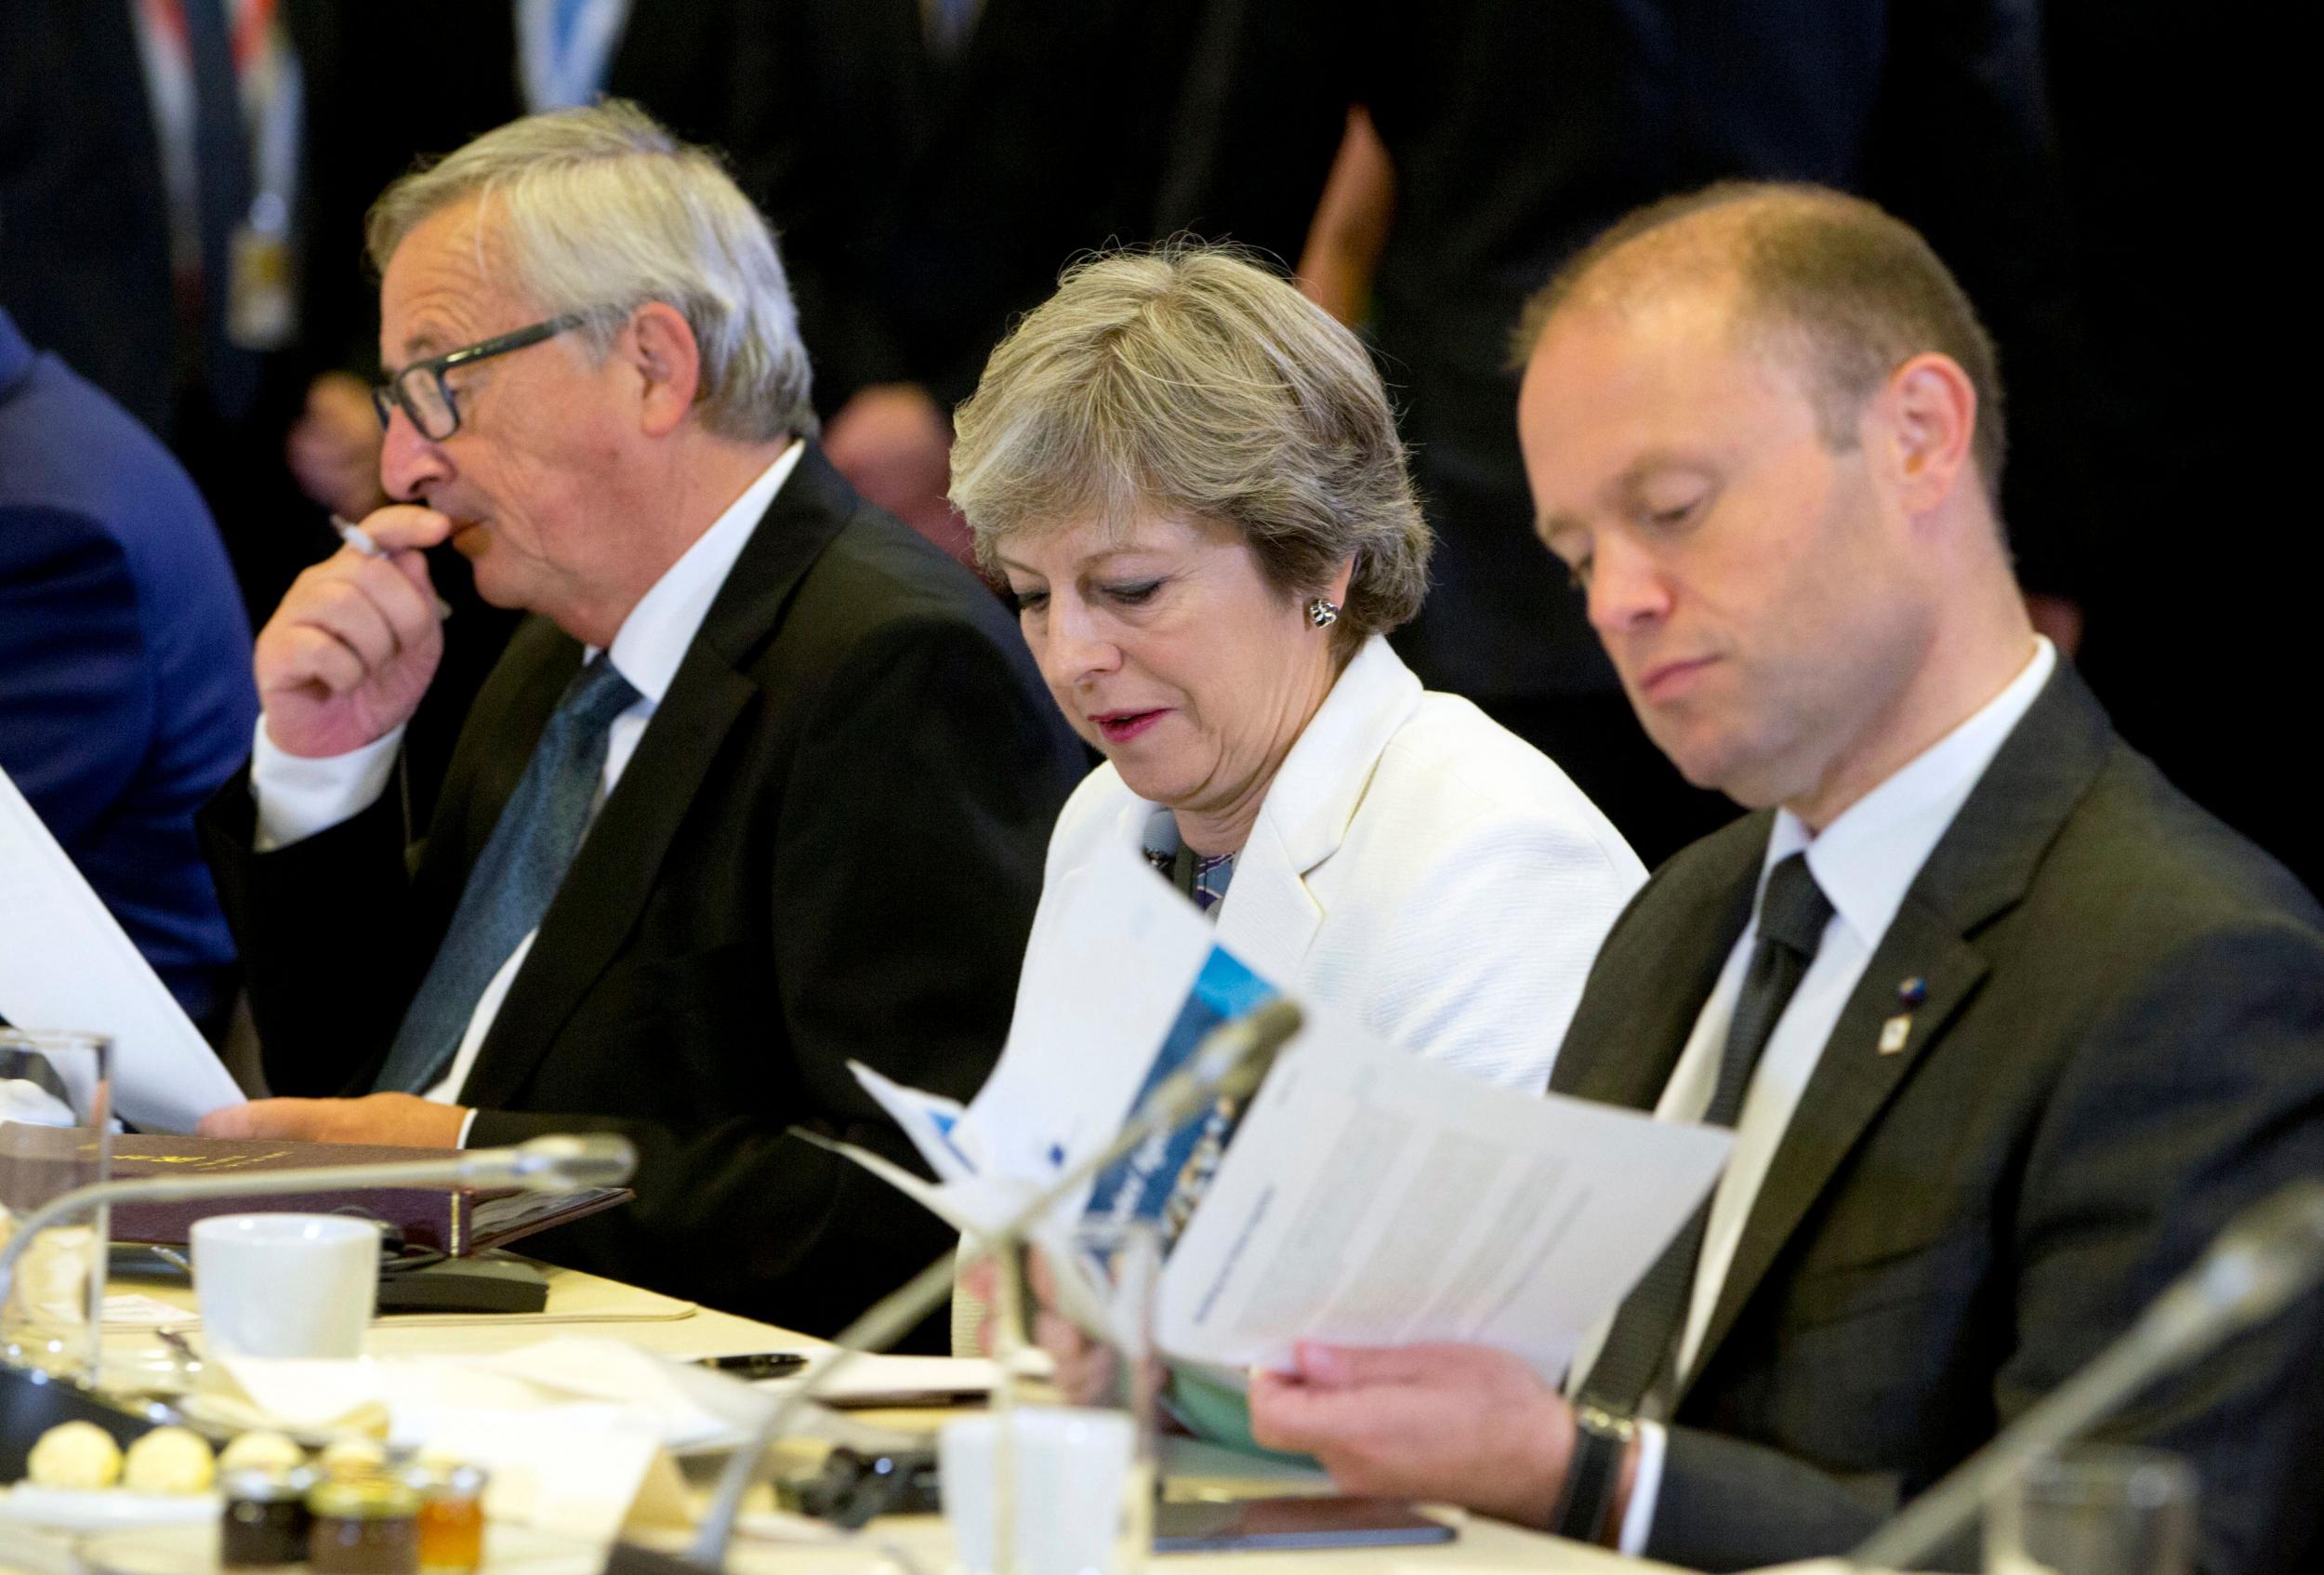 The PM has admitted that the negotiations have hit ‘difficulty’